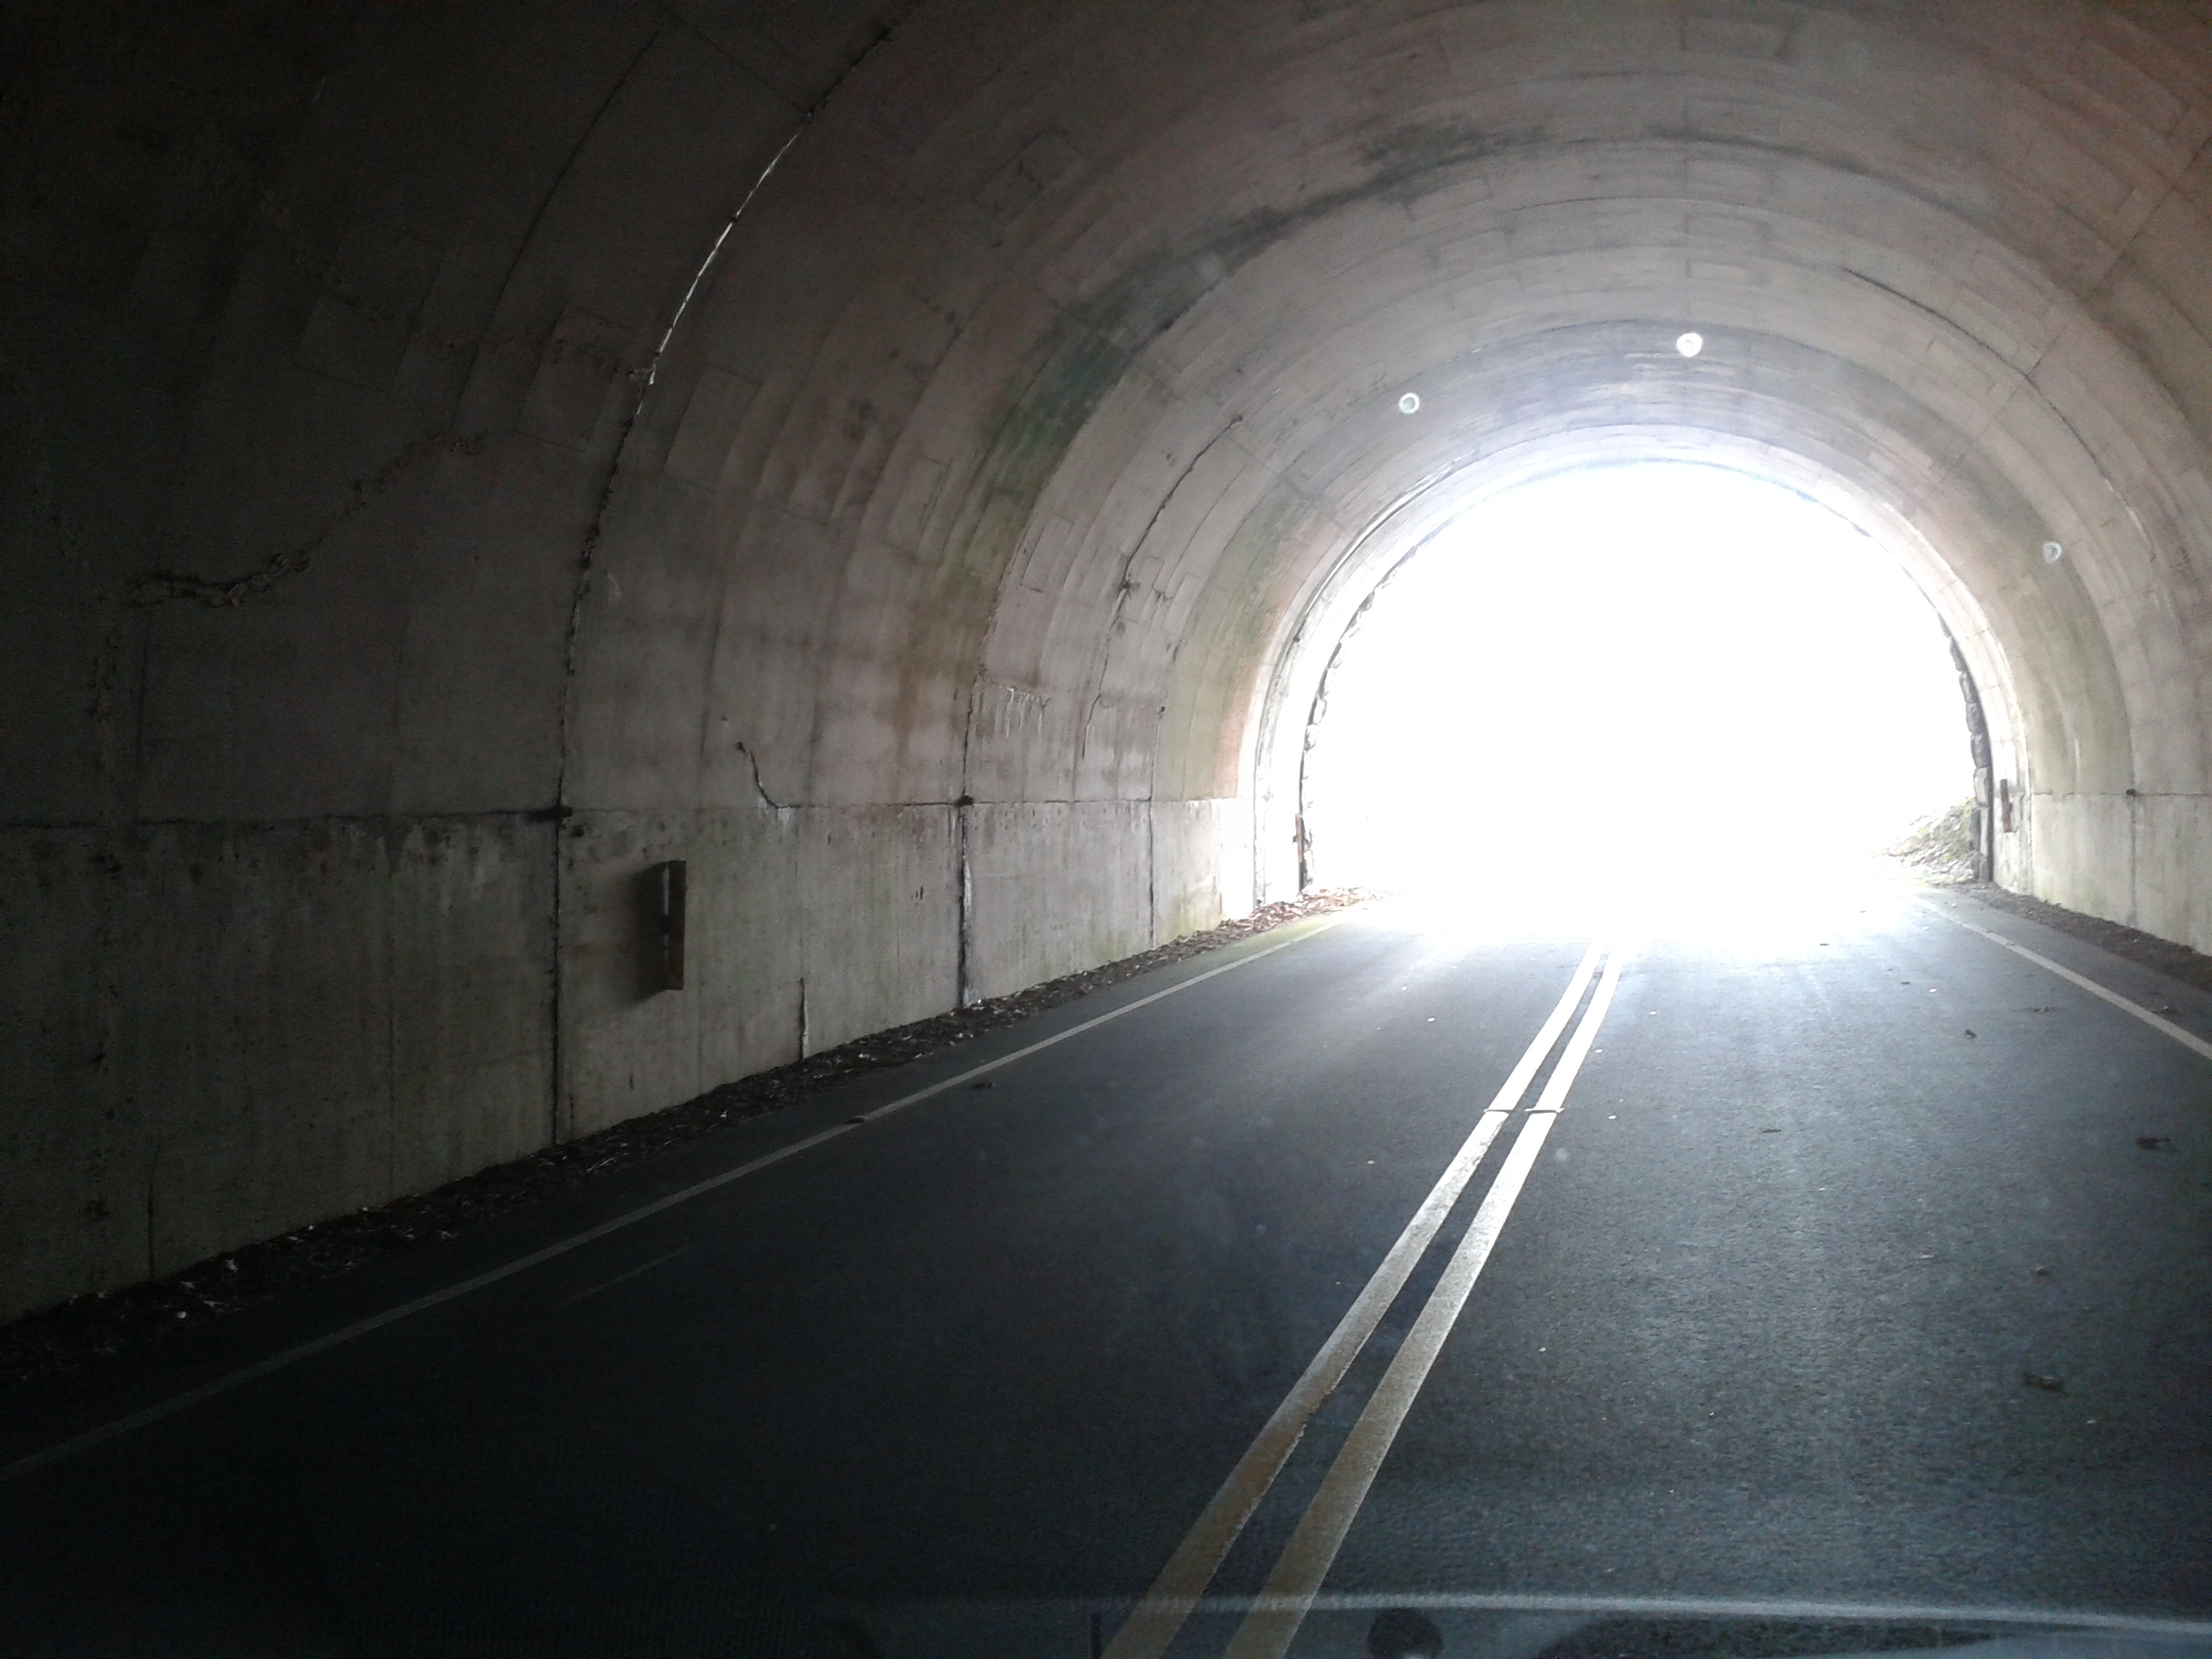 The View at the End of the Tunnel | CampClem